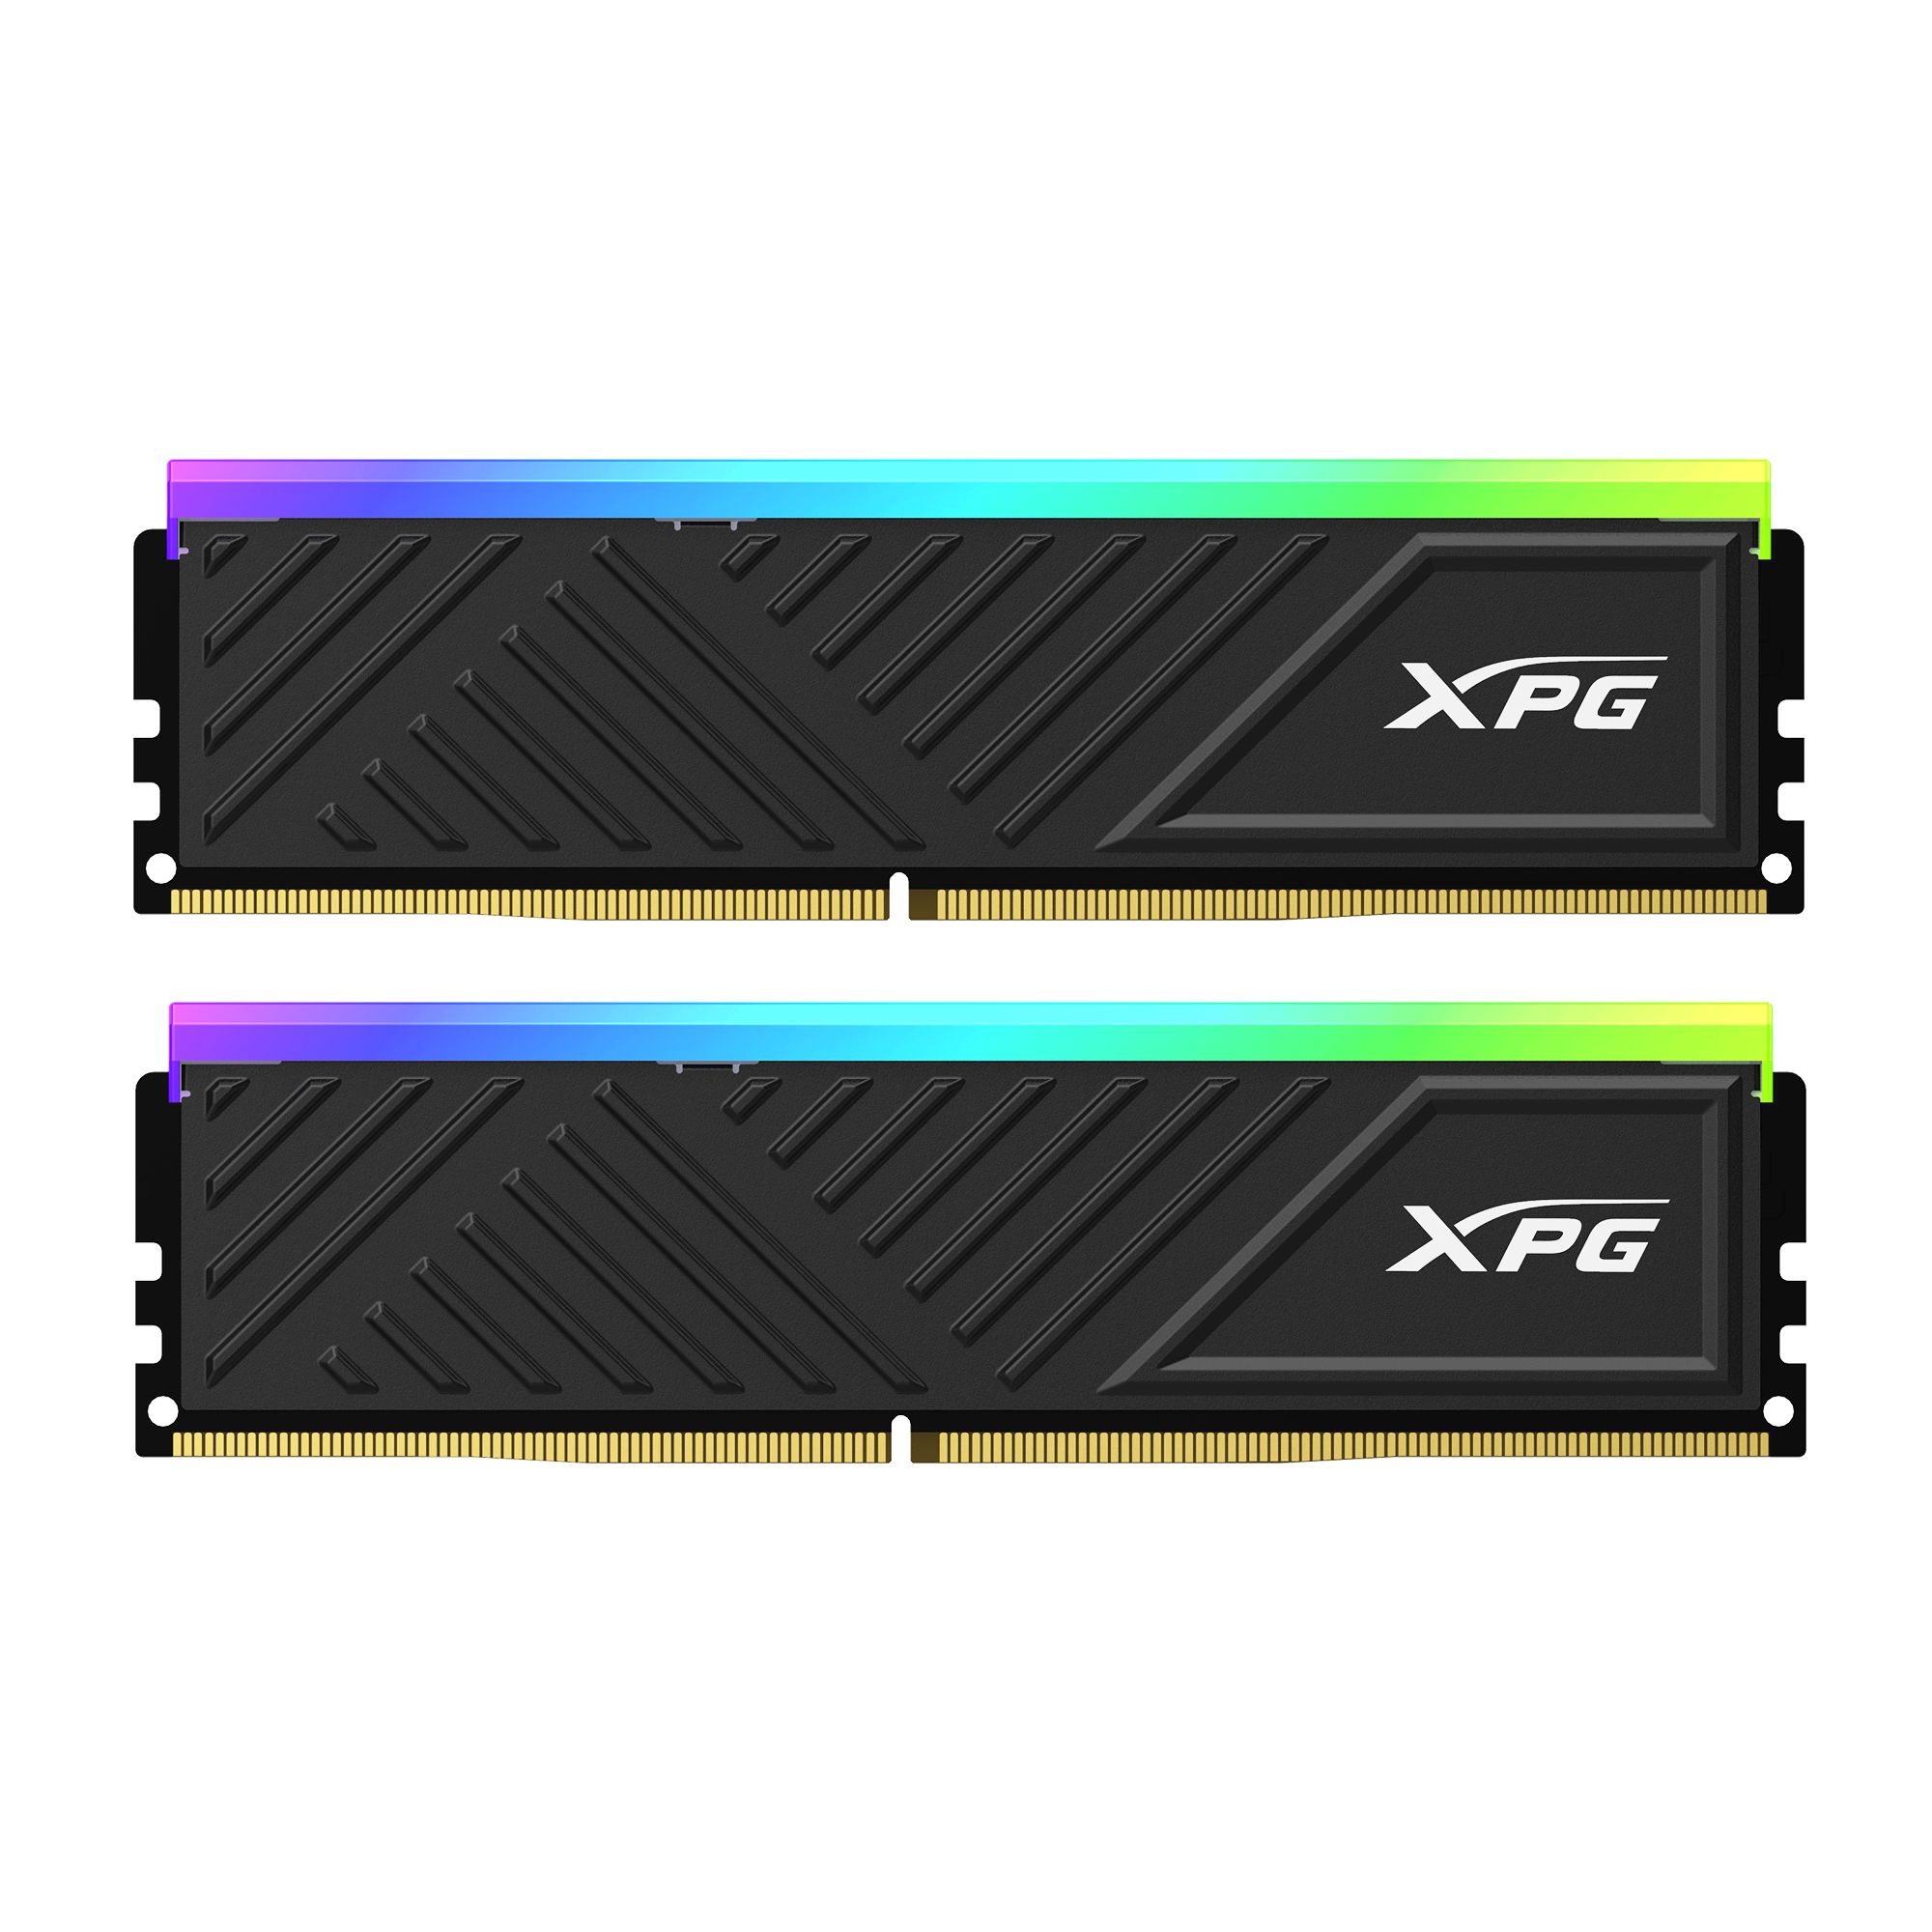 Memory capacity  64 GB Memory modules  2 Form factor  DIMM Type  DDR4 Memory speed  3200 MHz Clock speed  25600 MB/s CAS latency  CL16 Memory timing  16-20-20 Voltage  1.35 V Cooling  radiator Module profile  standard Module height  36 mm More features  overclocking series XMP lighting Lighting sync_1